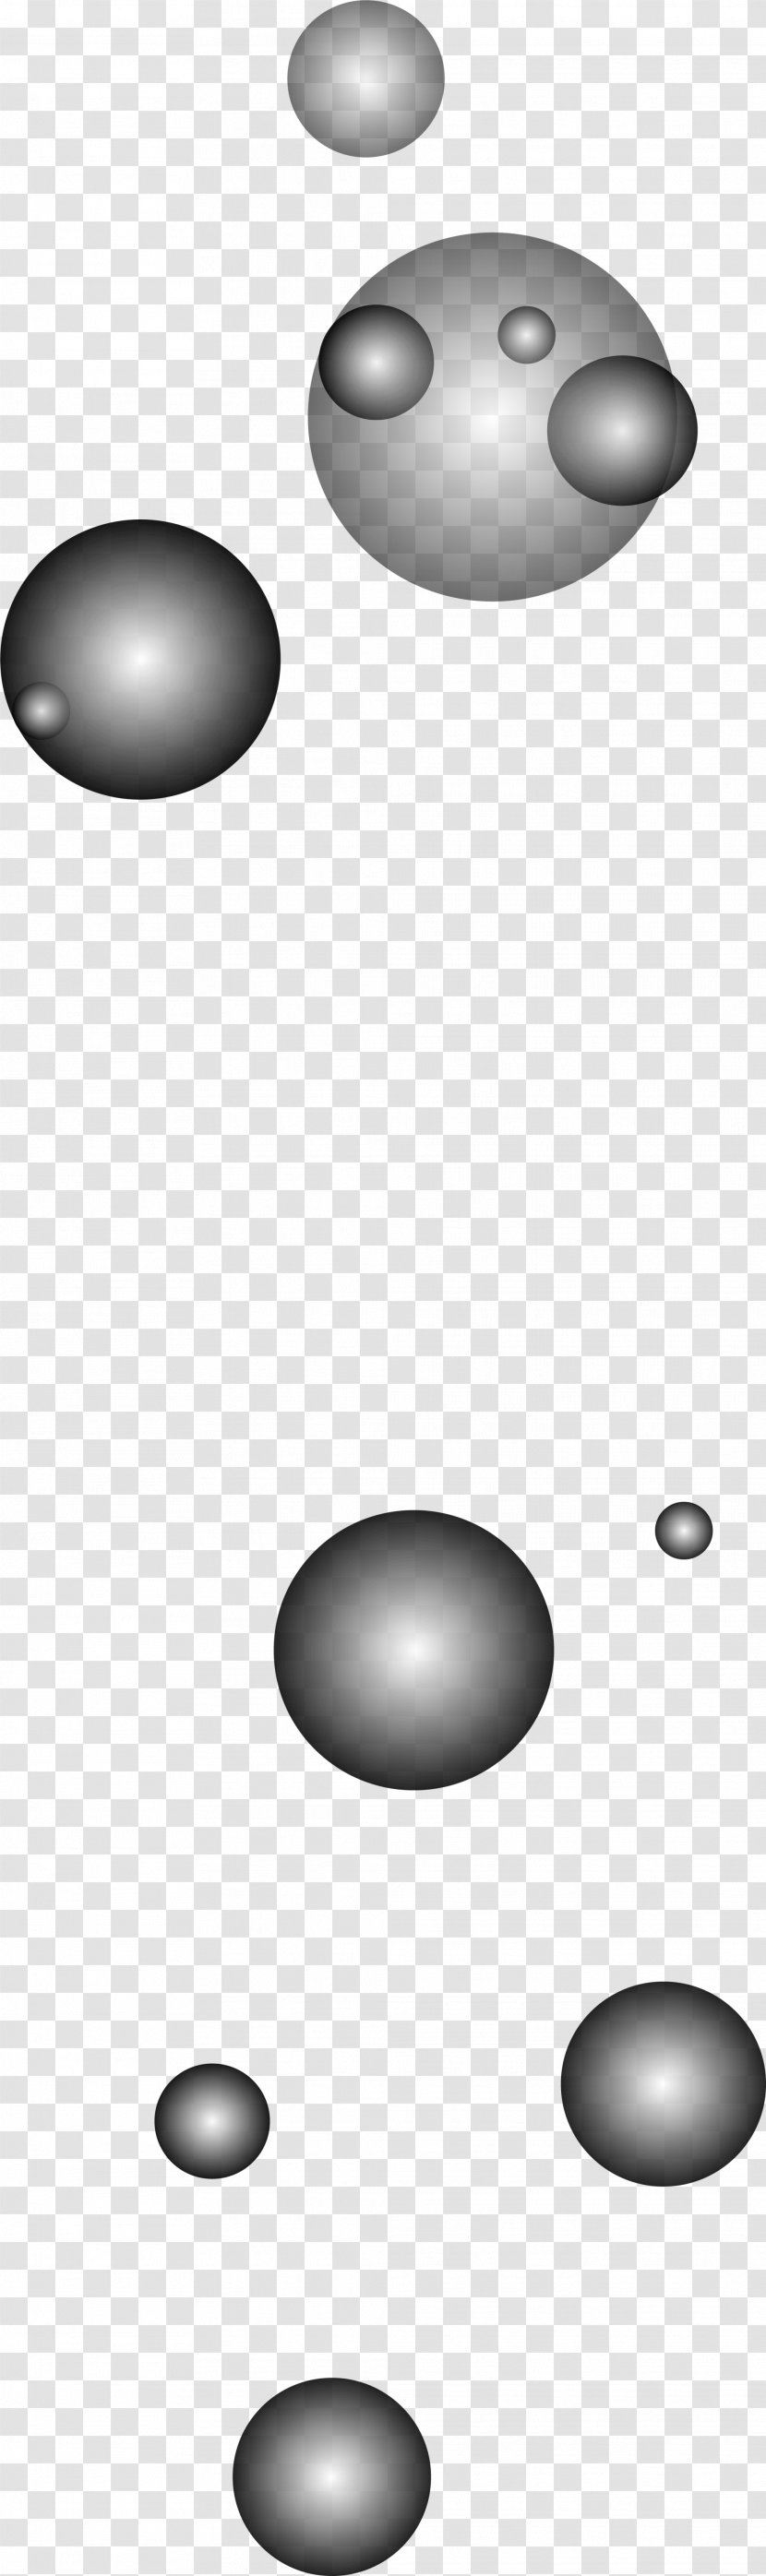 Black And White Clip Art - Floating Circle Transparent PNG